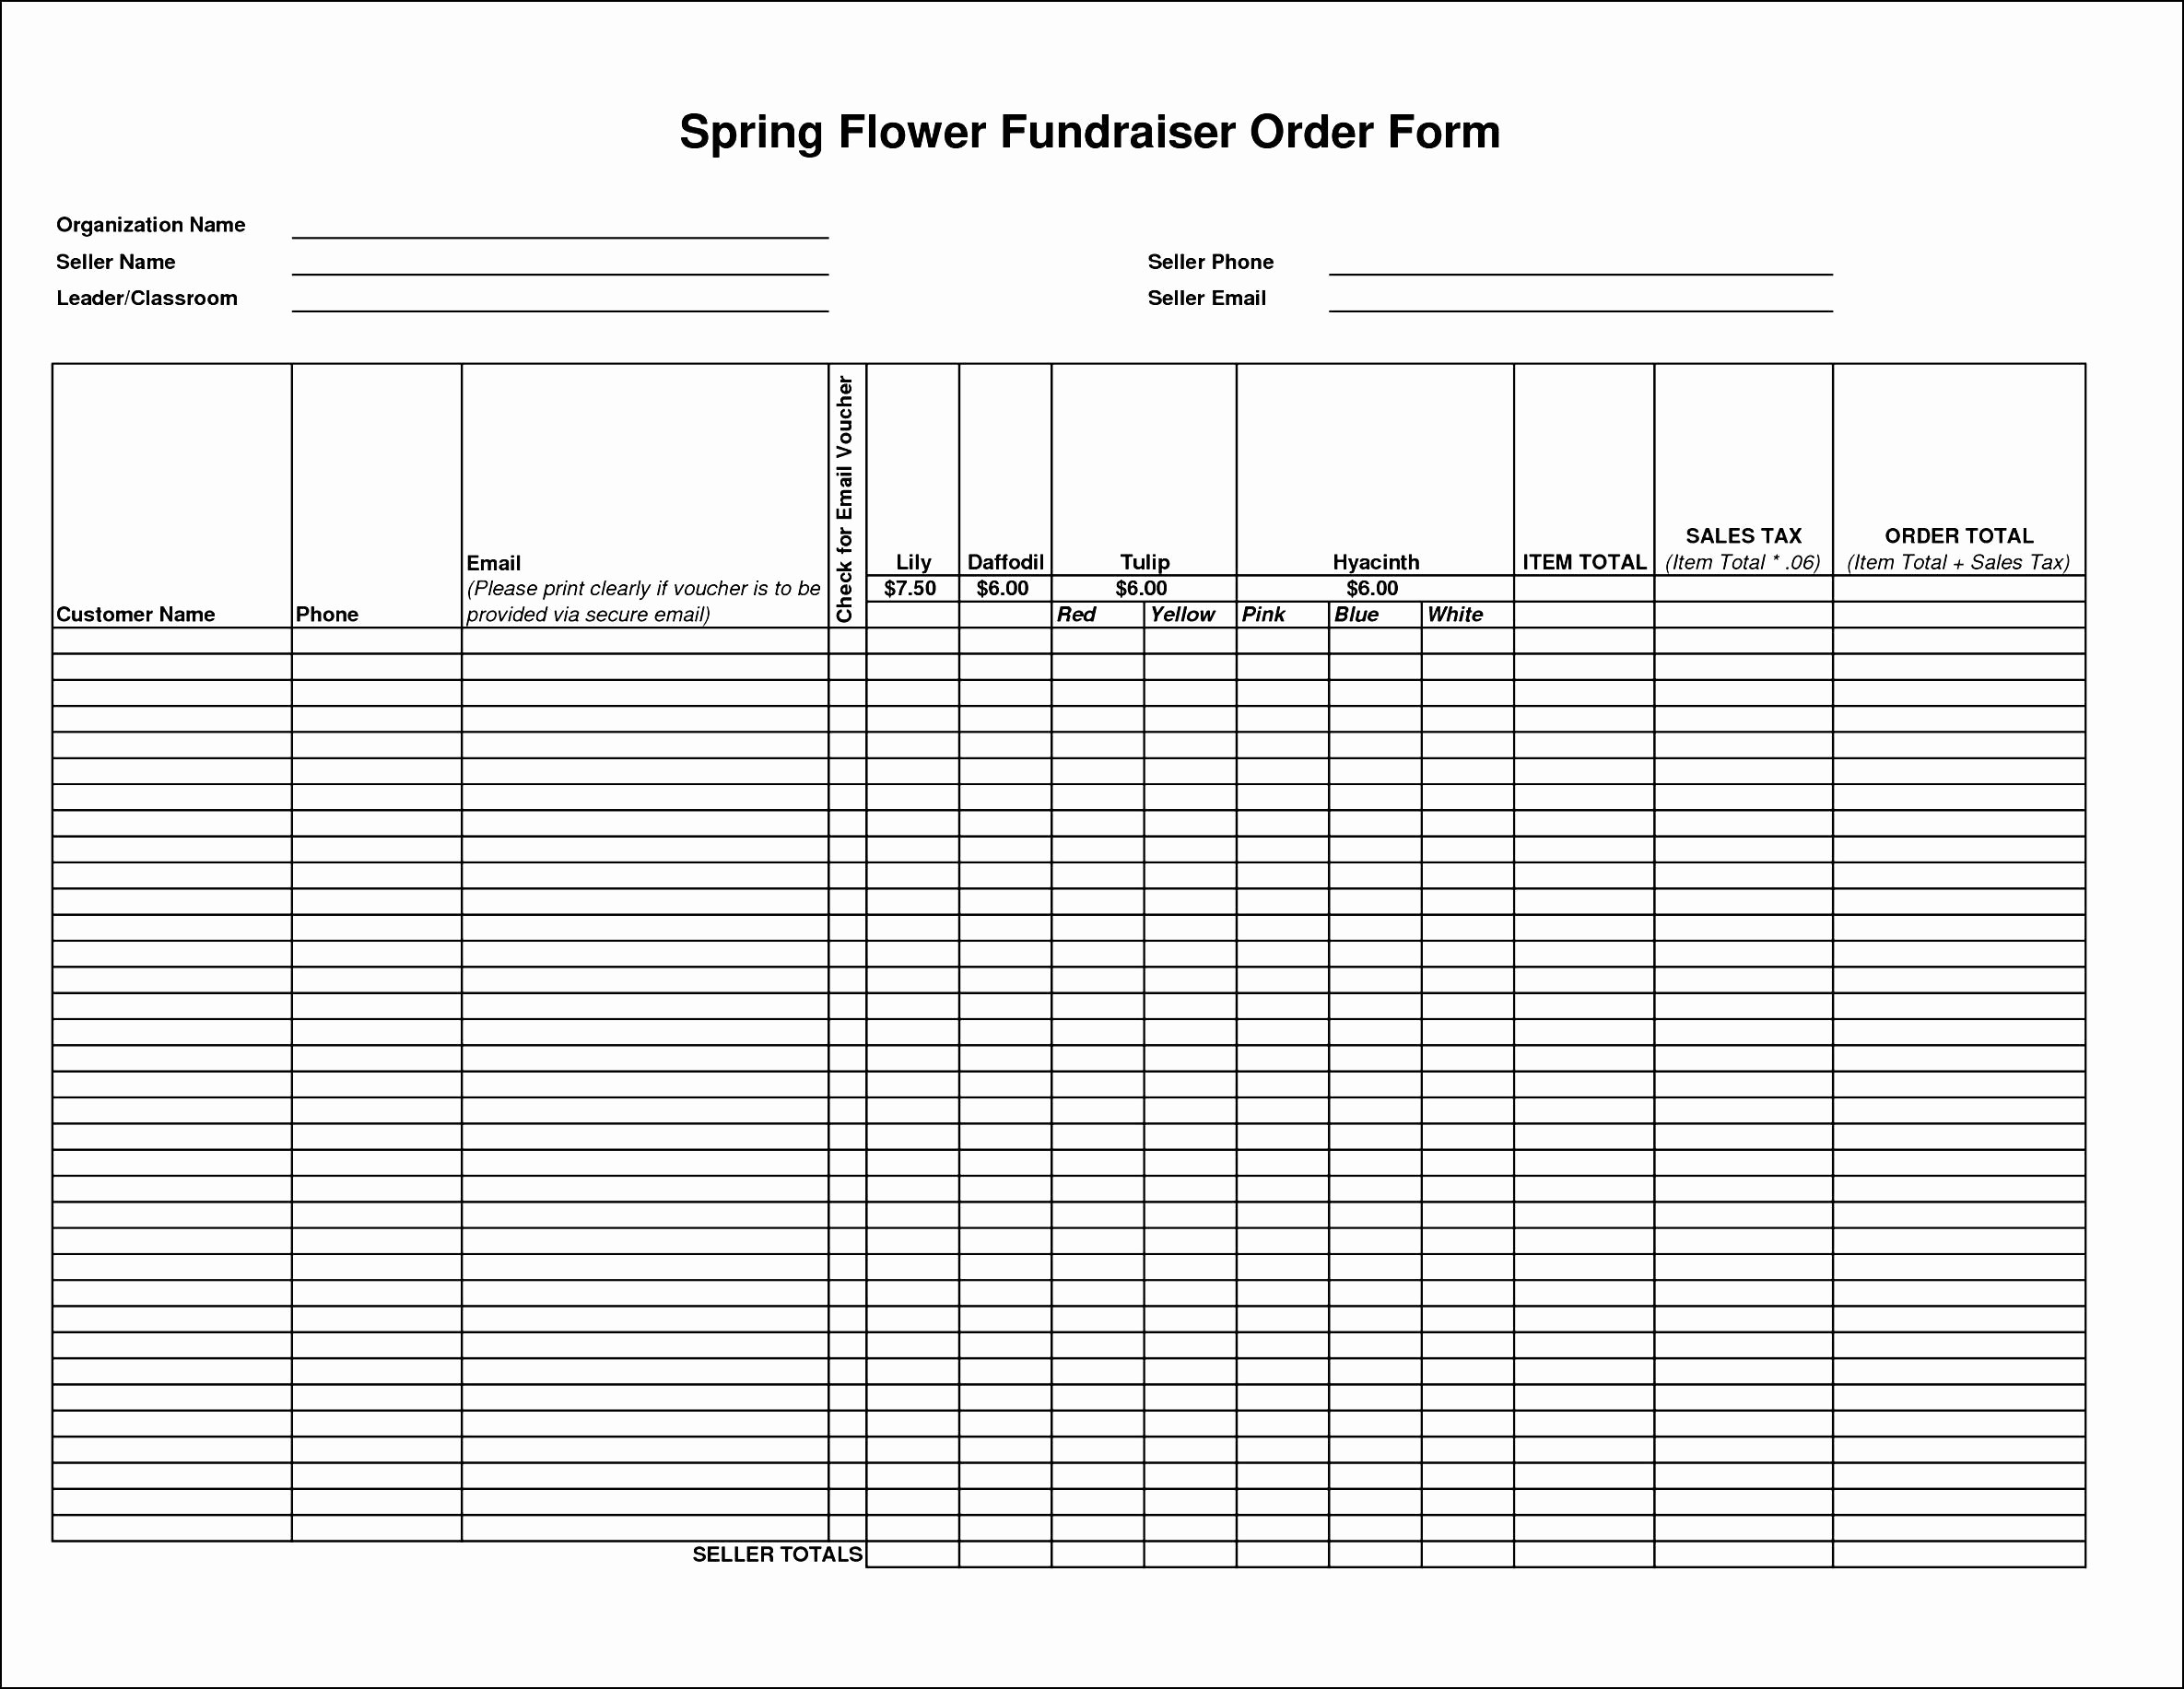 Fundraiser order form Template Excel Inspirational Collection solutions Flower Fundraiser order forms